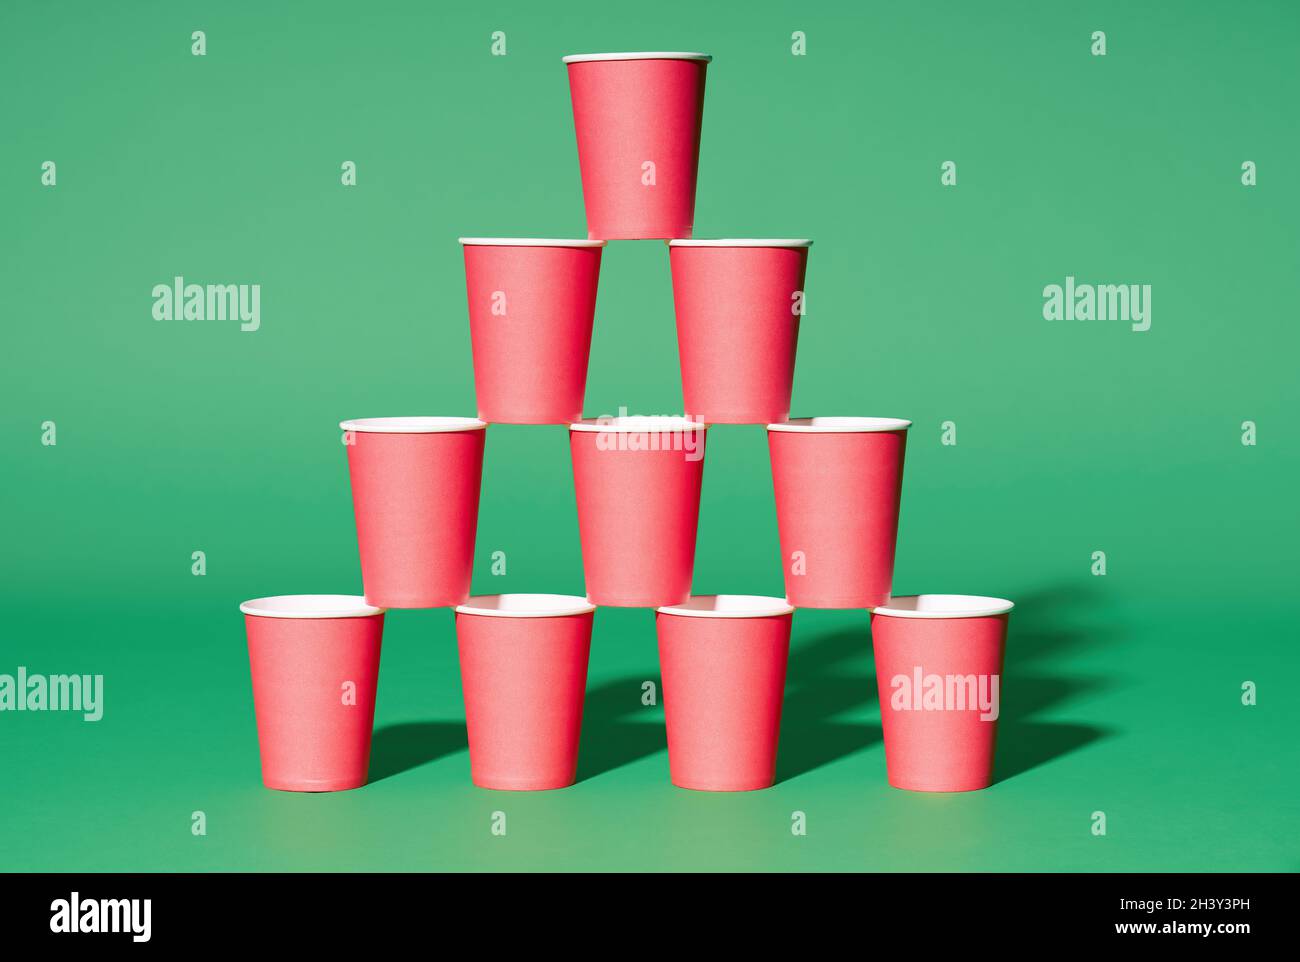 https://c8.alamy.com/comp/2H3Y3PH/pyramid-of-red-paper-cups-on-green-background-2H3Y3PH.jpg